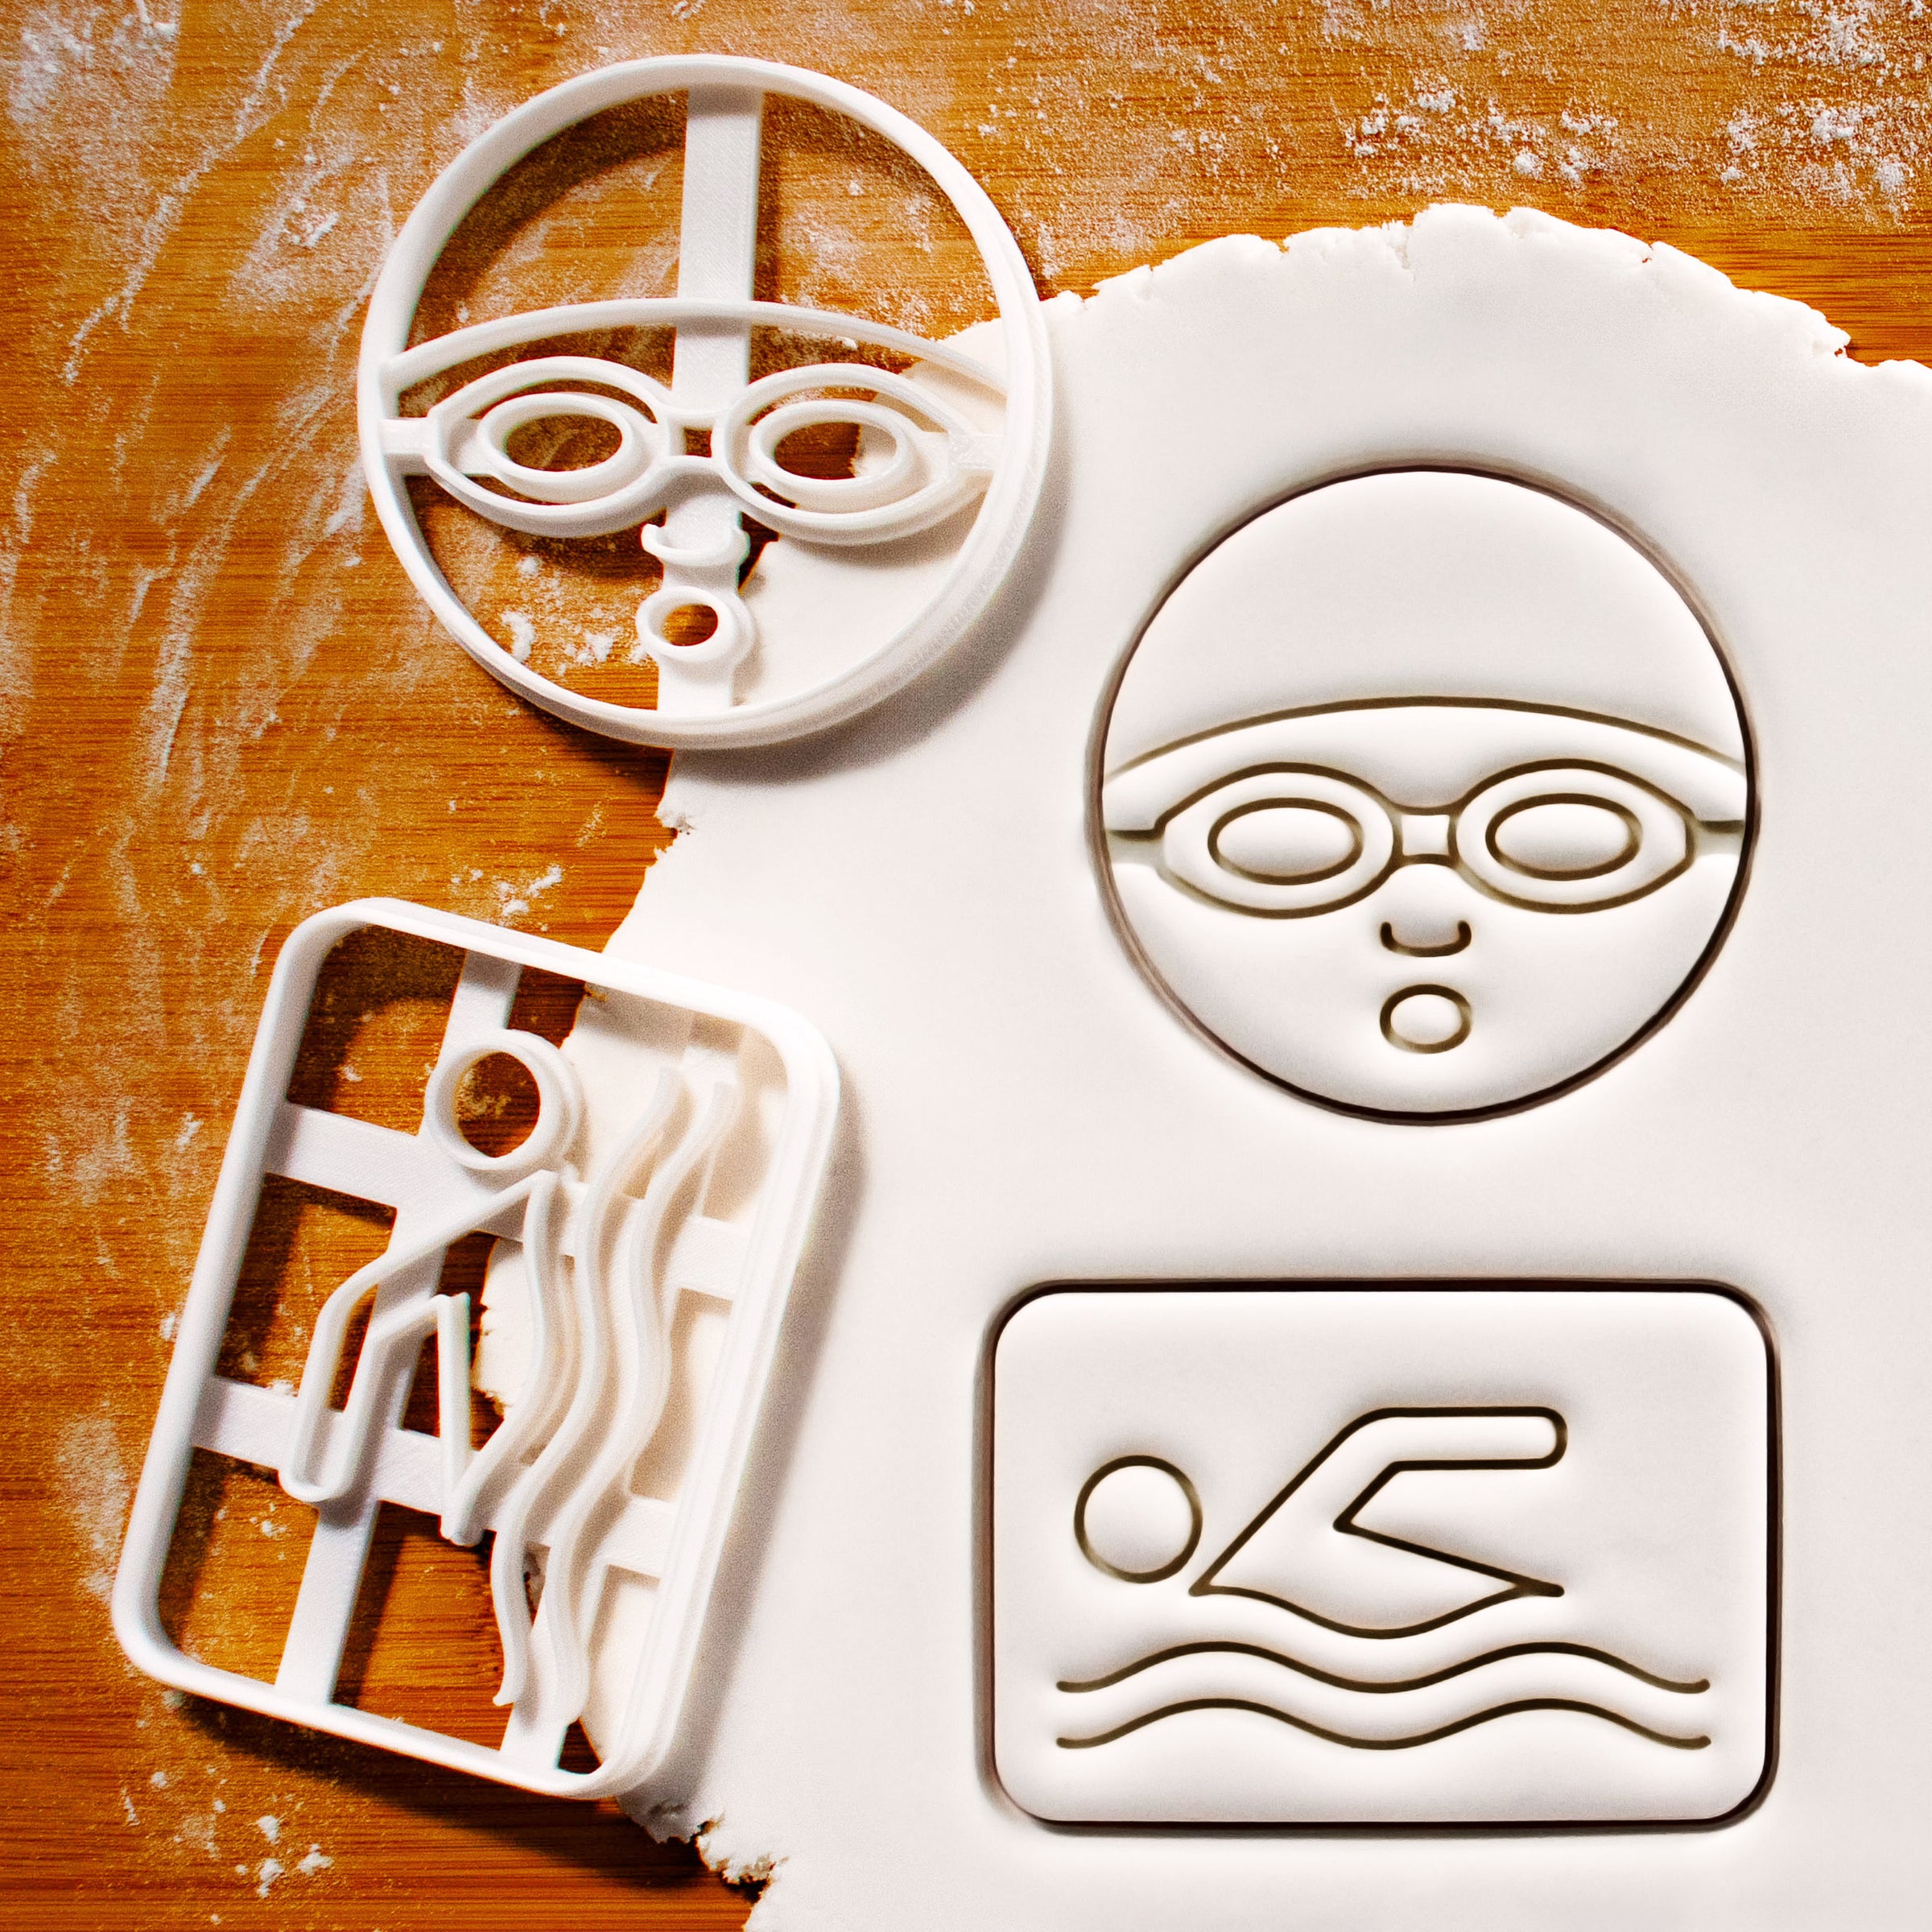 PROMO SET: Set of 2 Swimming Cookie Cutters